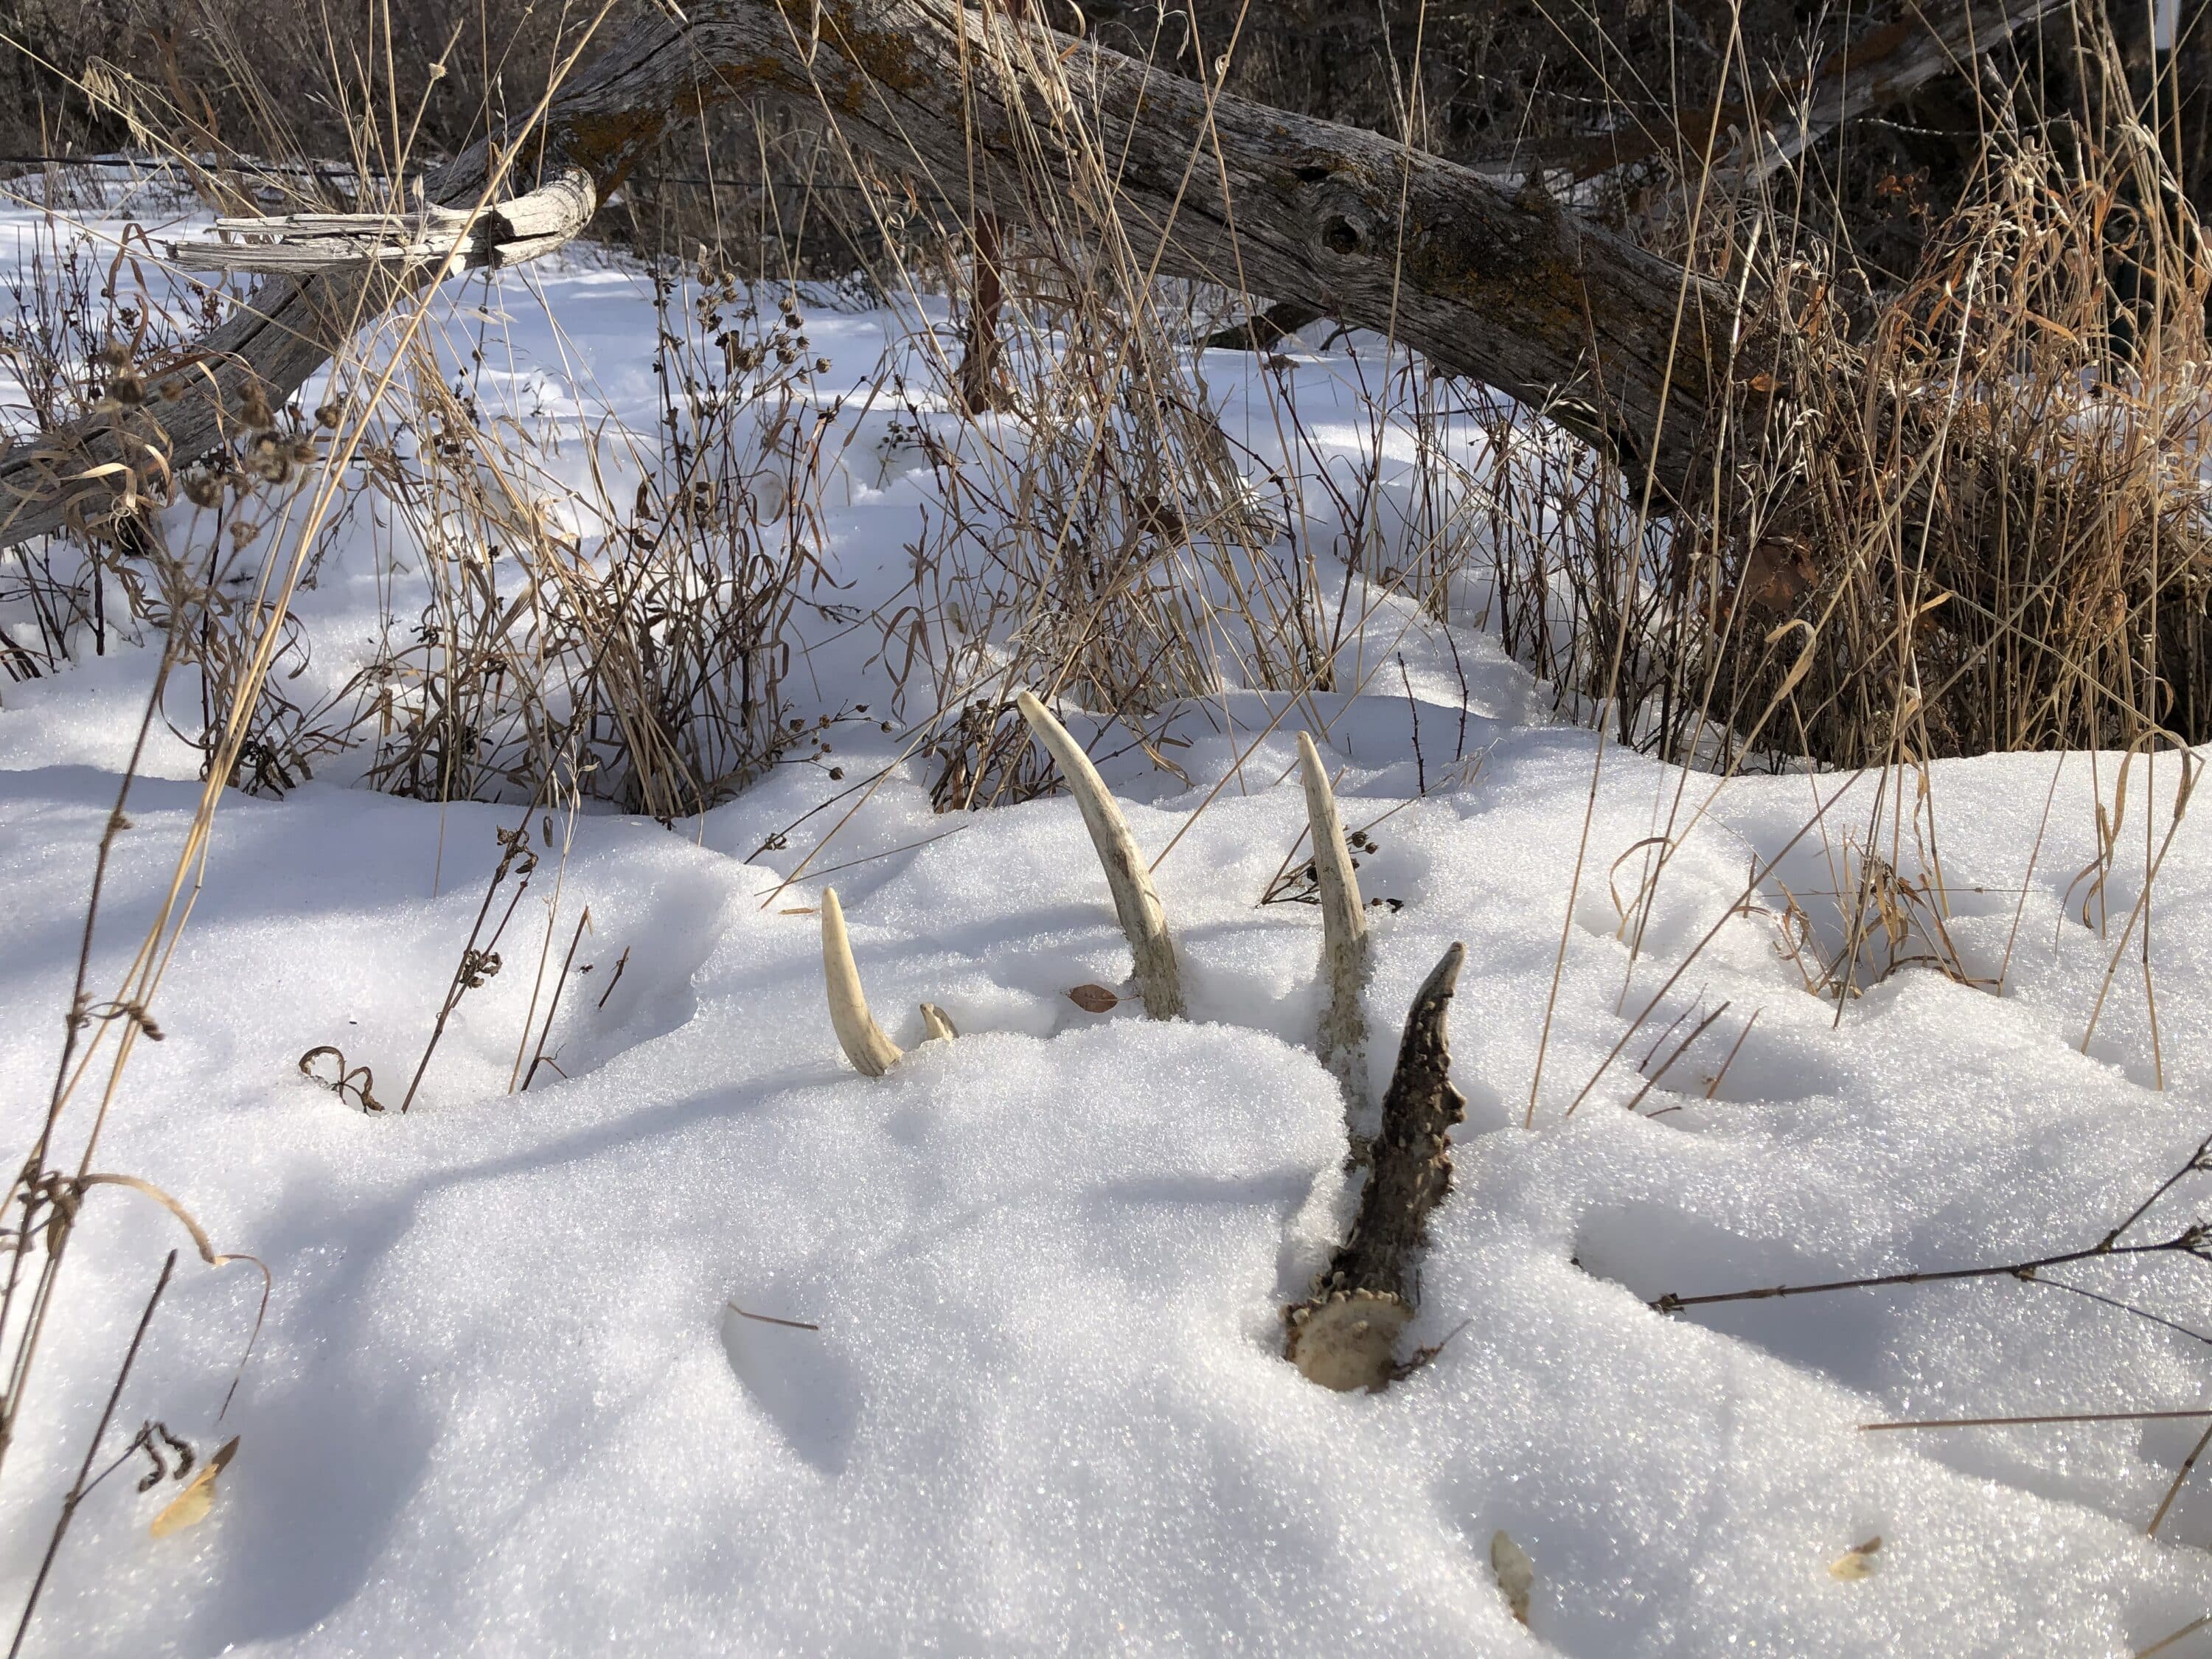 Shed antler hunting allows you to see all aspects of the potential of a particular hunting property.